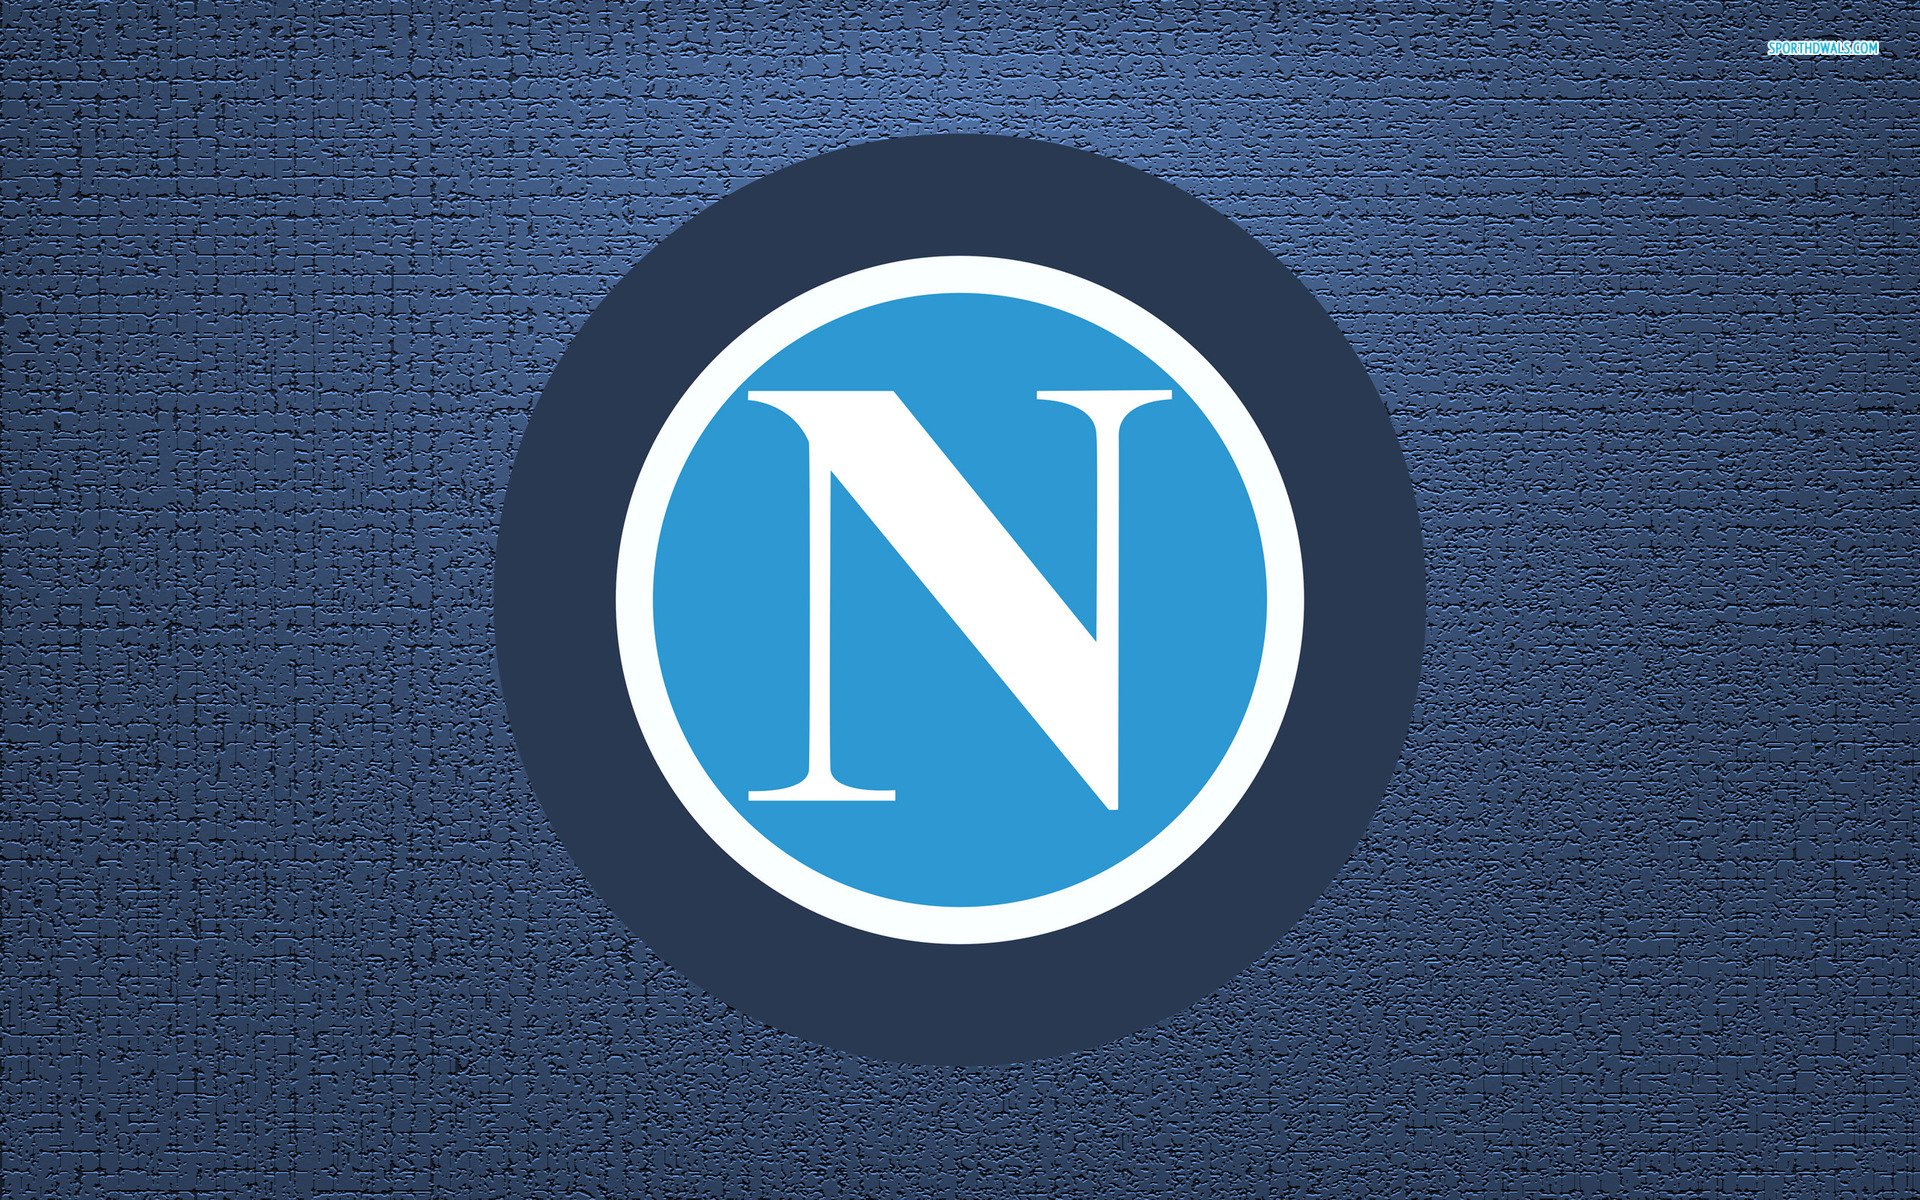 S C Napoli Wallpaper And Background Image